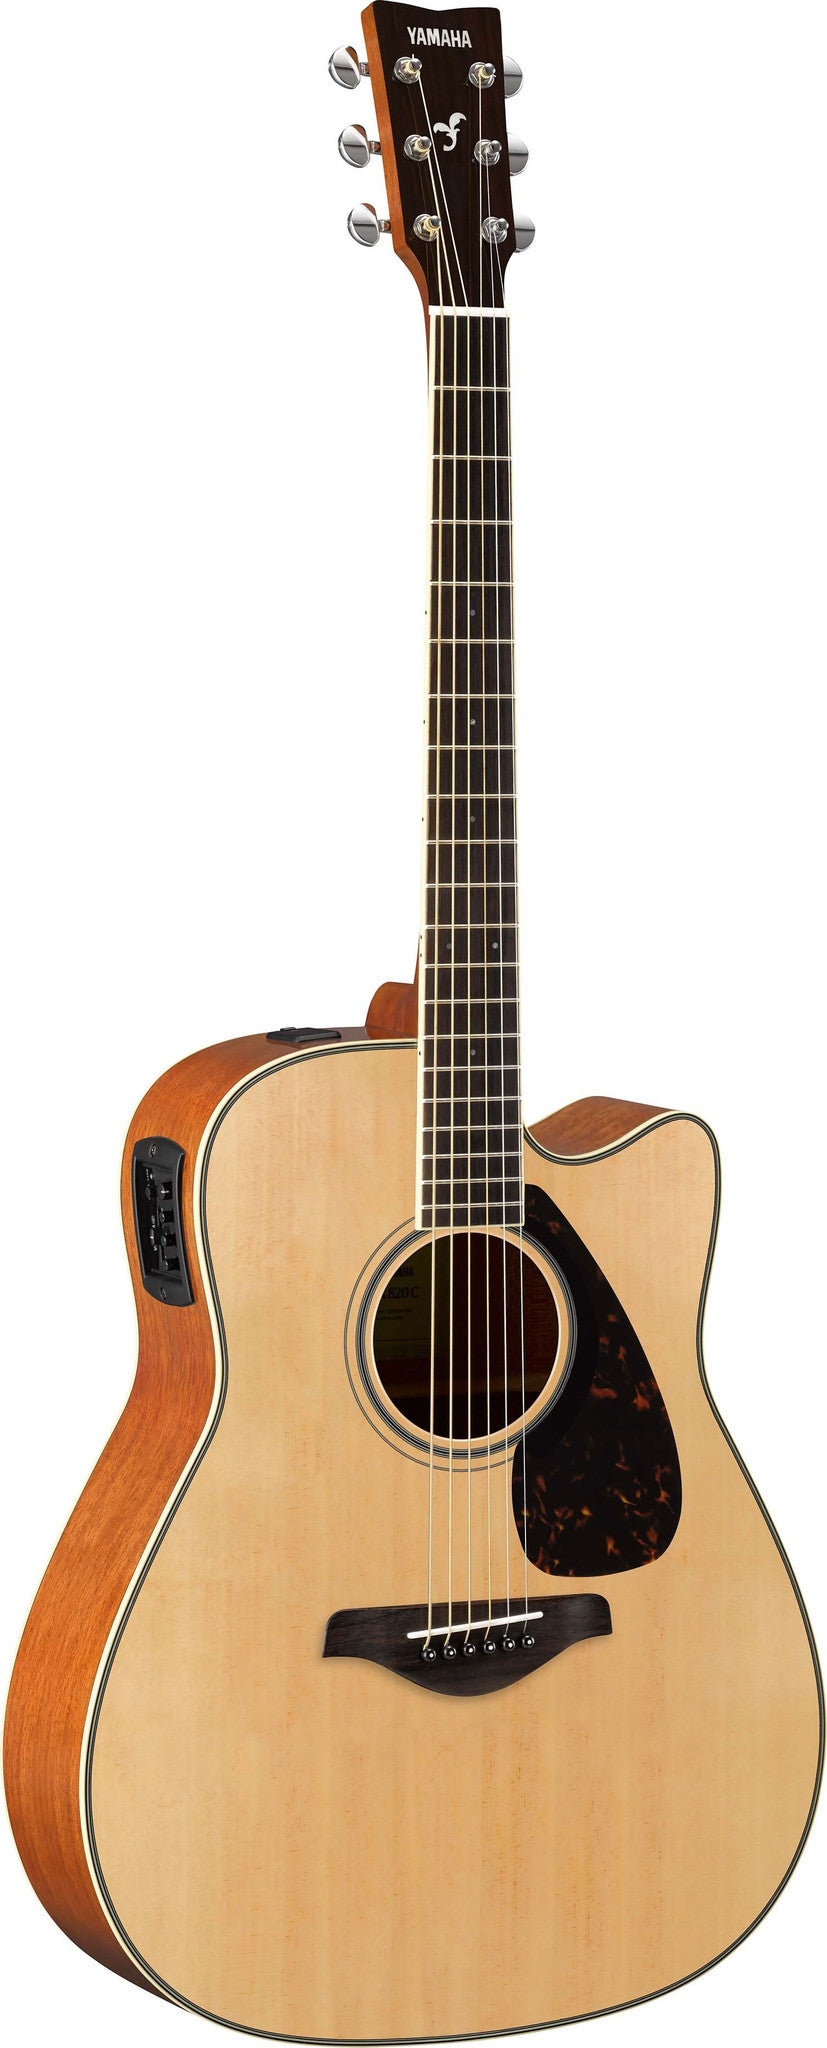 Yamaha FGX820C  Acoustic Electric Dreadnought Guitar